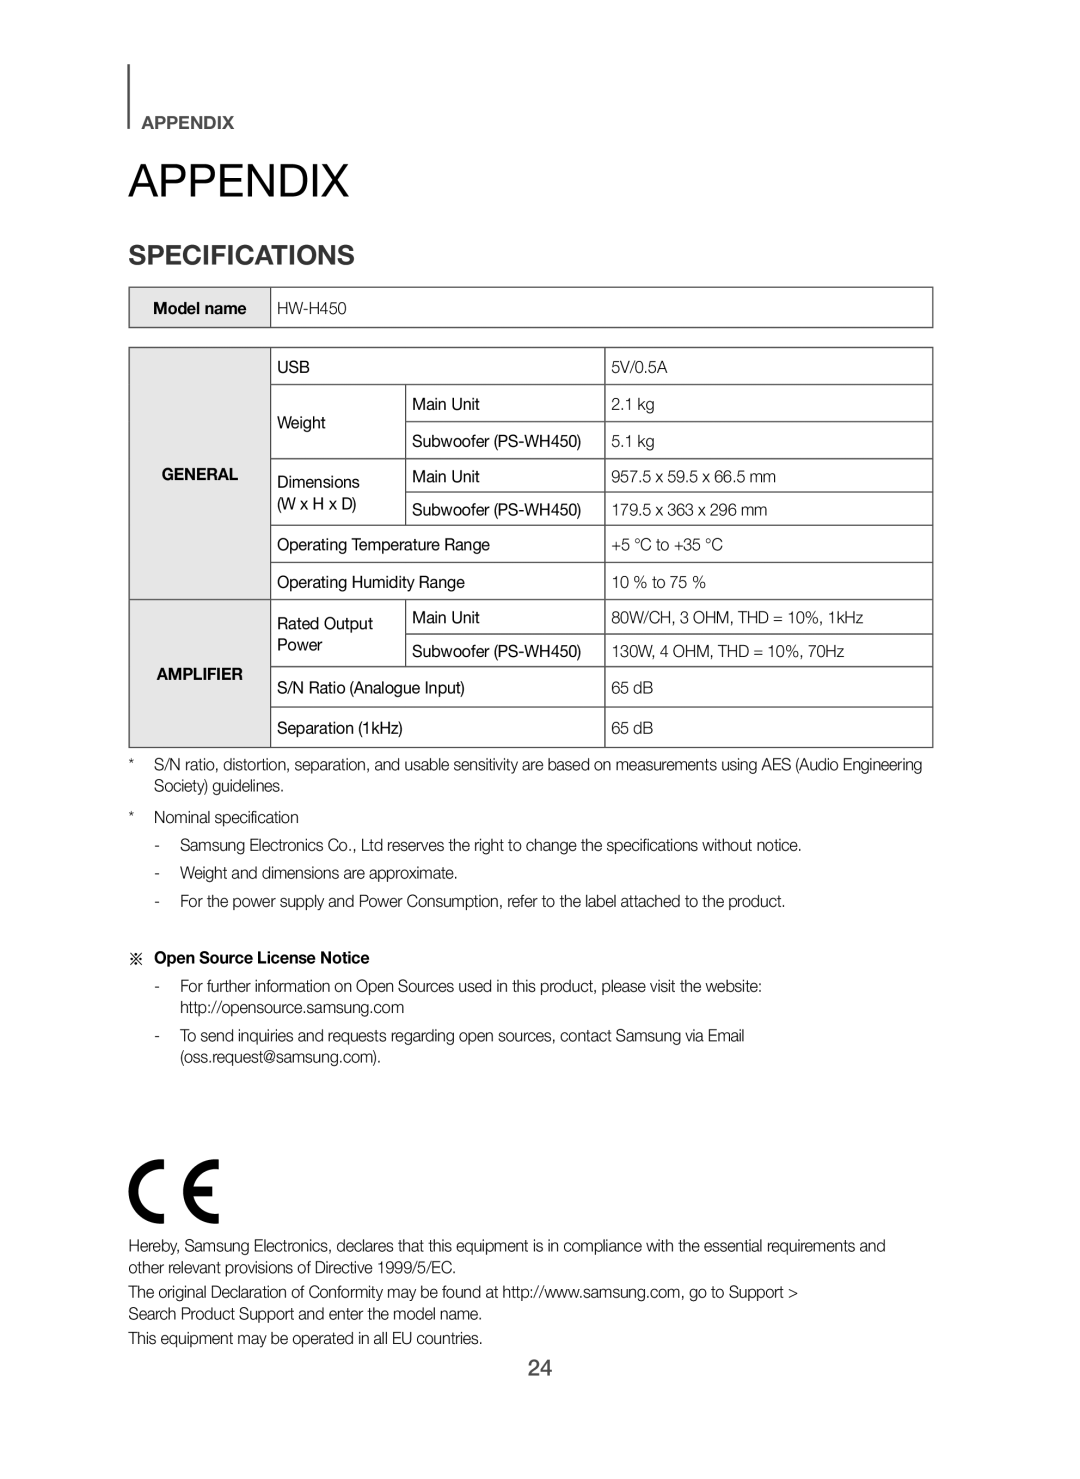 Samsung HW-H450/XE, HW-H450/TK, HW-H450/EN, HW-H450/ZF manual Appendix, Specifications, Model name, Open Source License Notice 